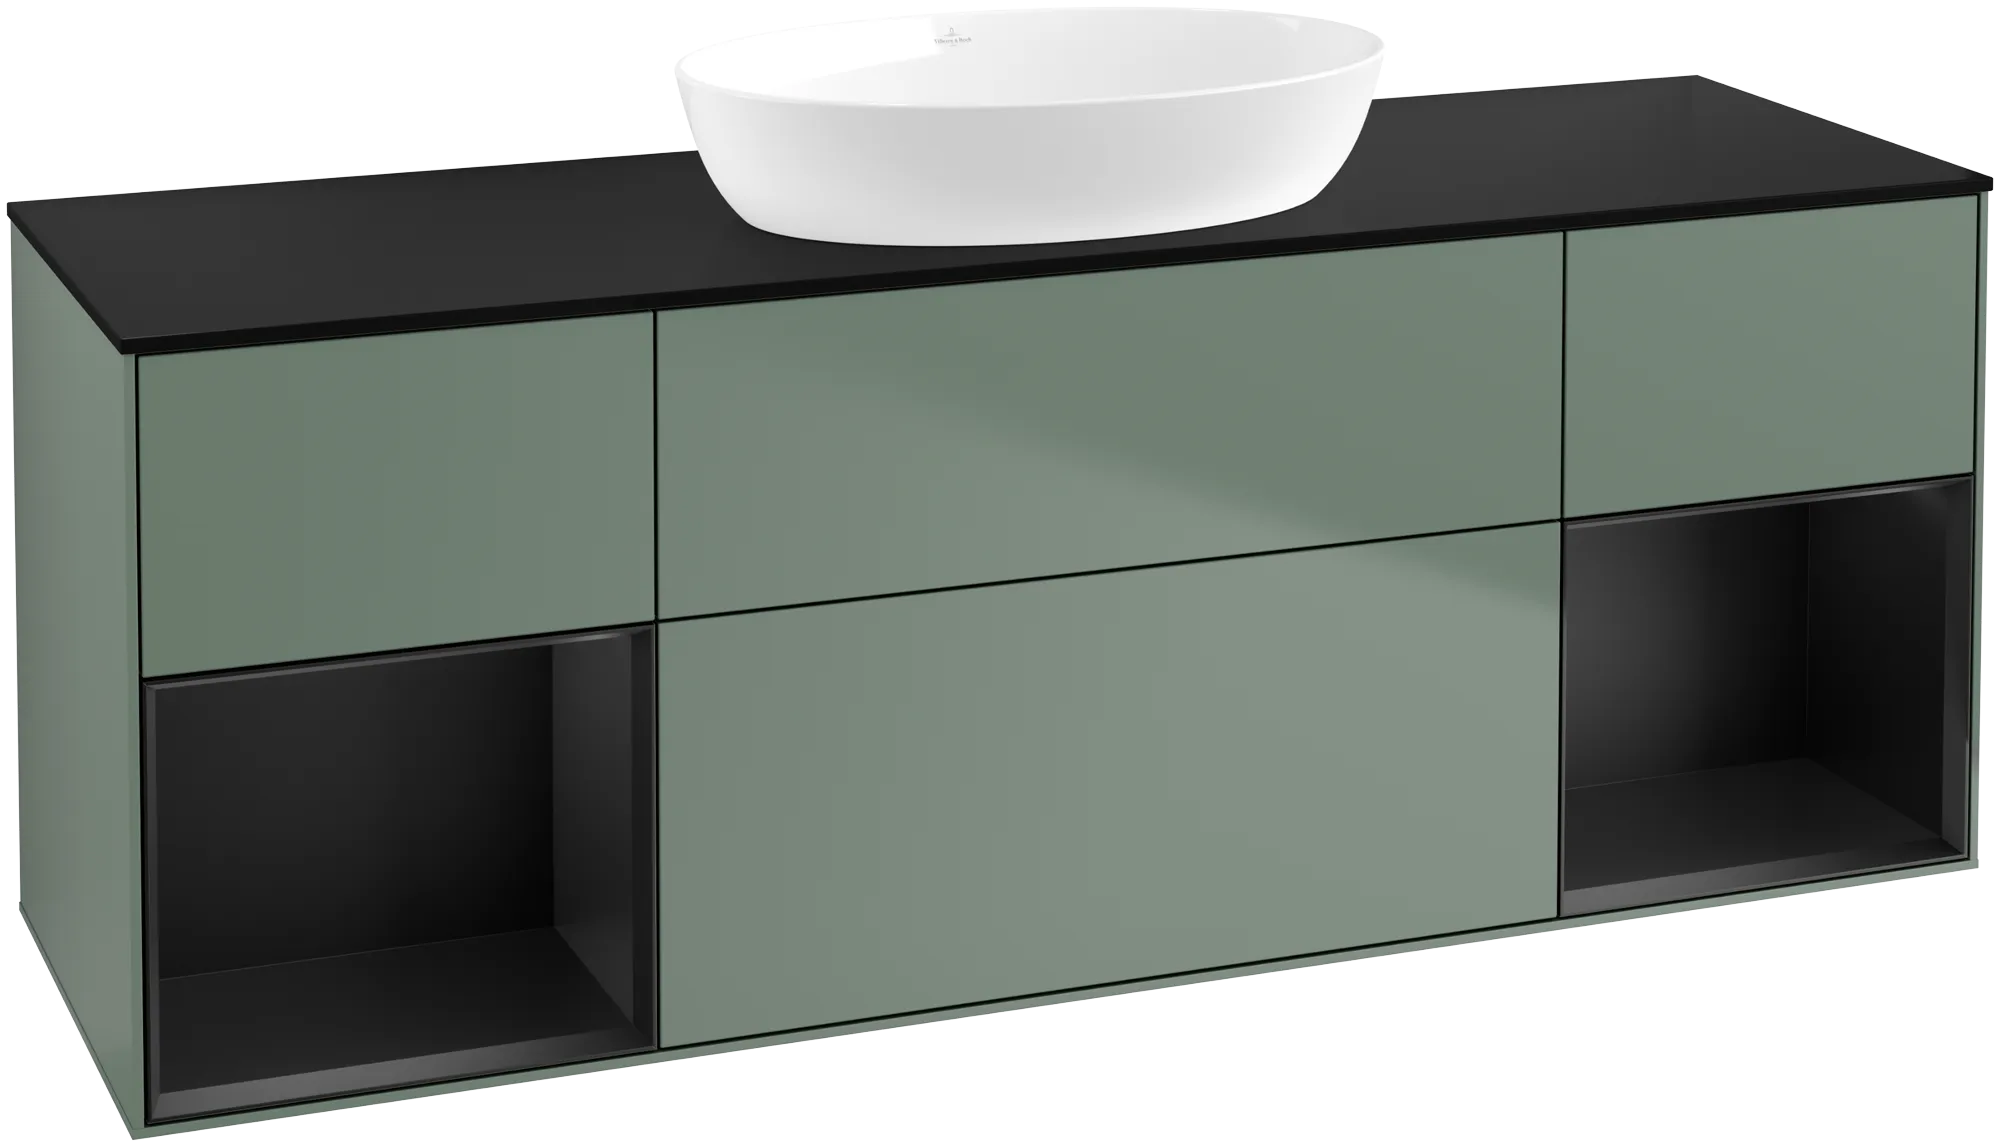 Picture of VILLEROY BOCH Finion Vanity unit, with lighting, 4 pull-out compartments, 1600 x 603 x 501 mm, Olive Matt Lacquer / Black Matt Lacquer / Glass Black Matt #FD02PDGM